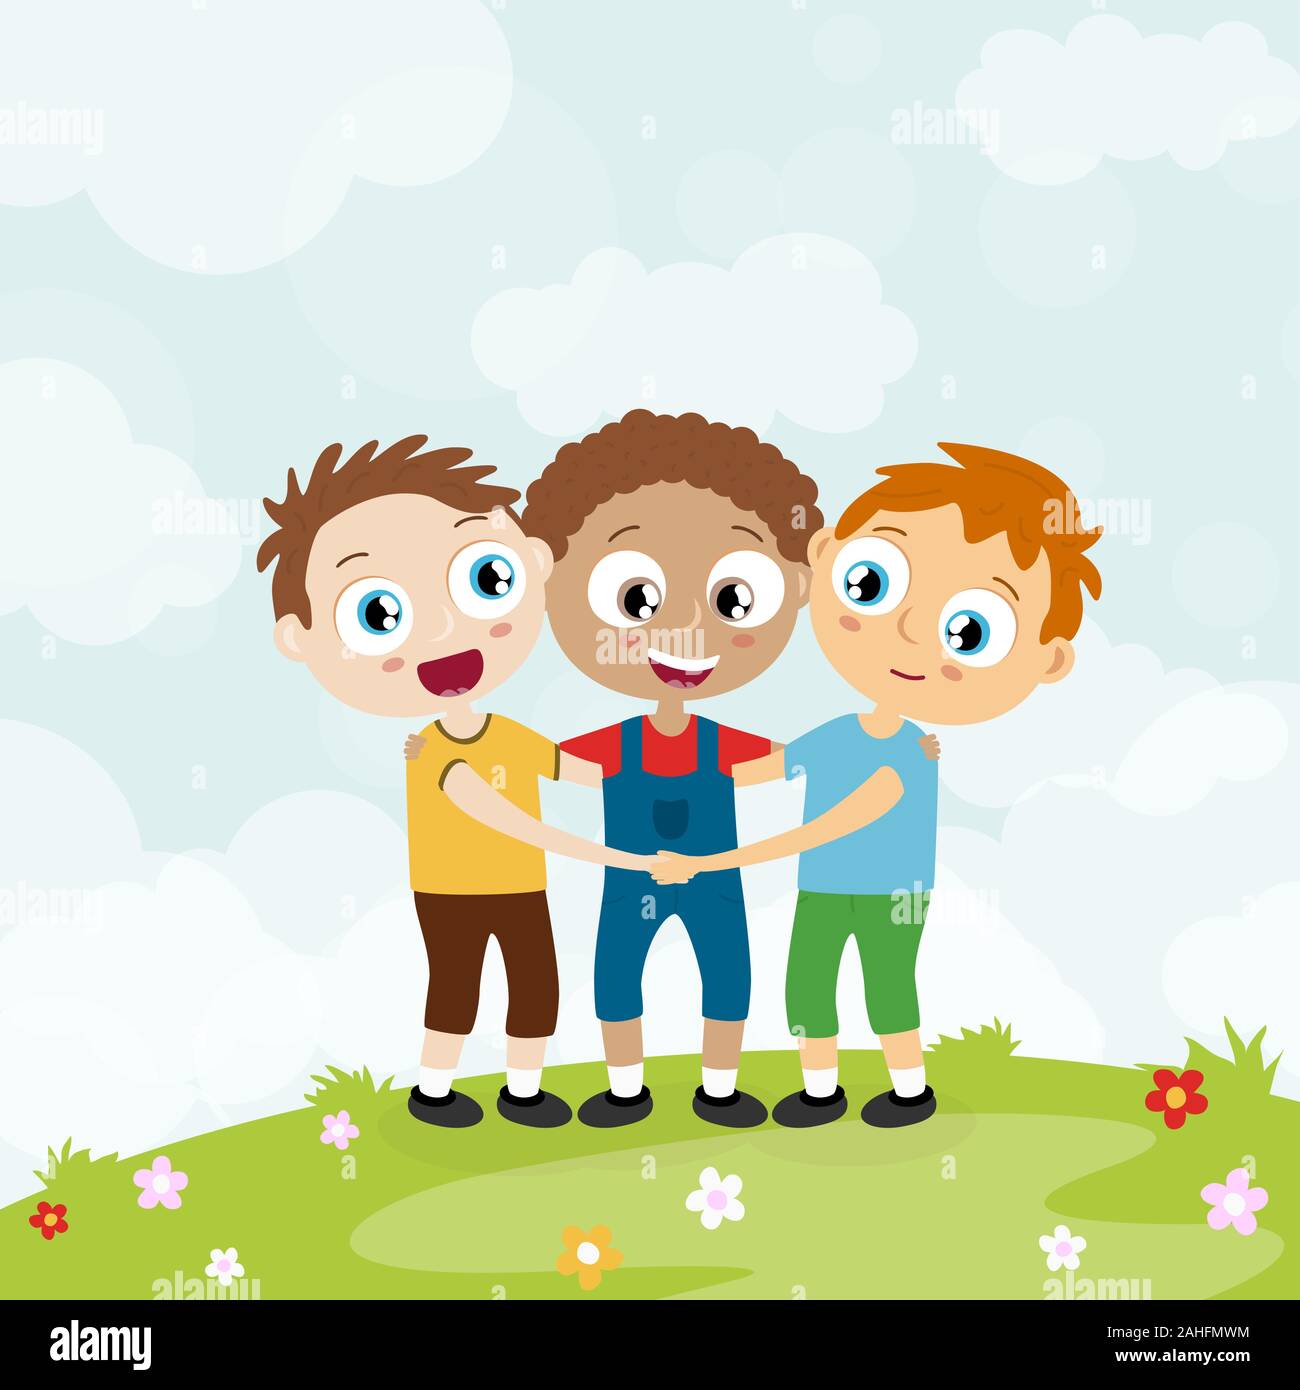 EPS10 vector file showing happy young boys with different skin colors, laughing, hug each other and having fun together with summer background Stock Vector